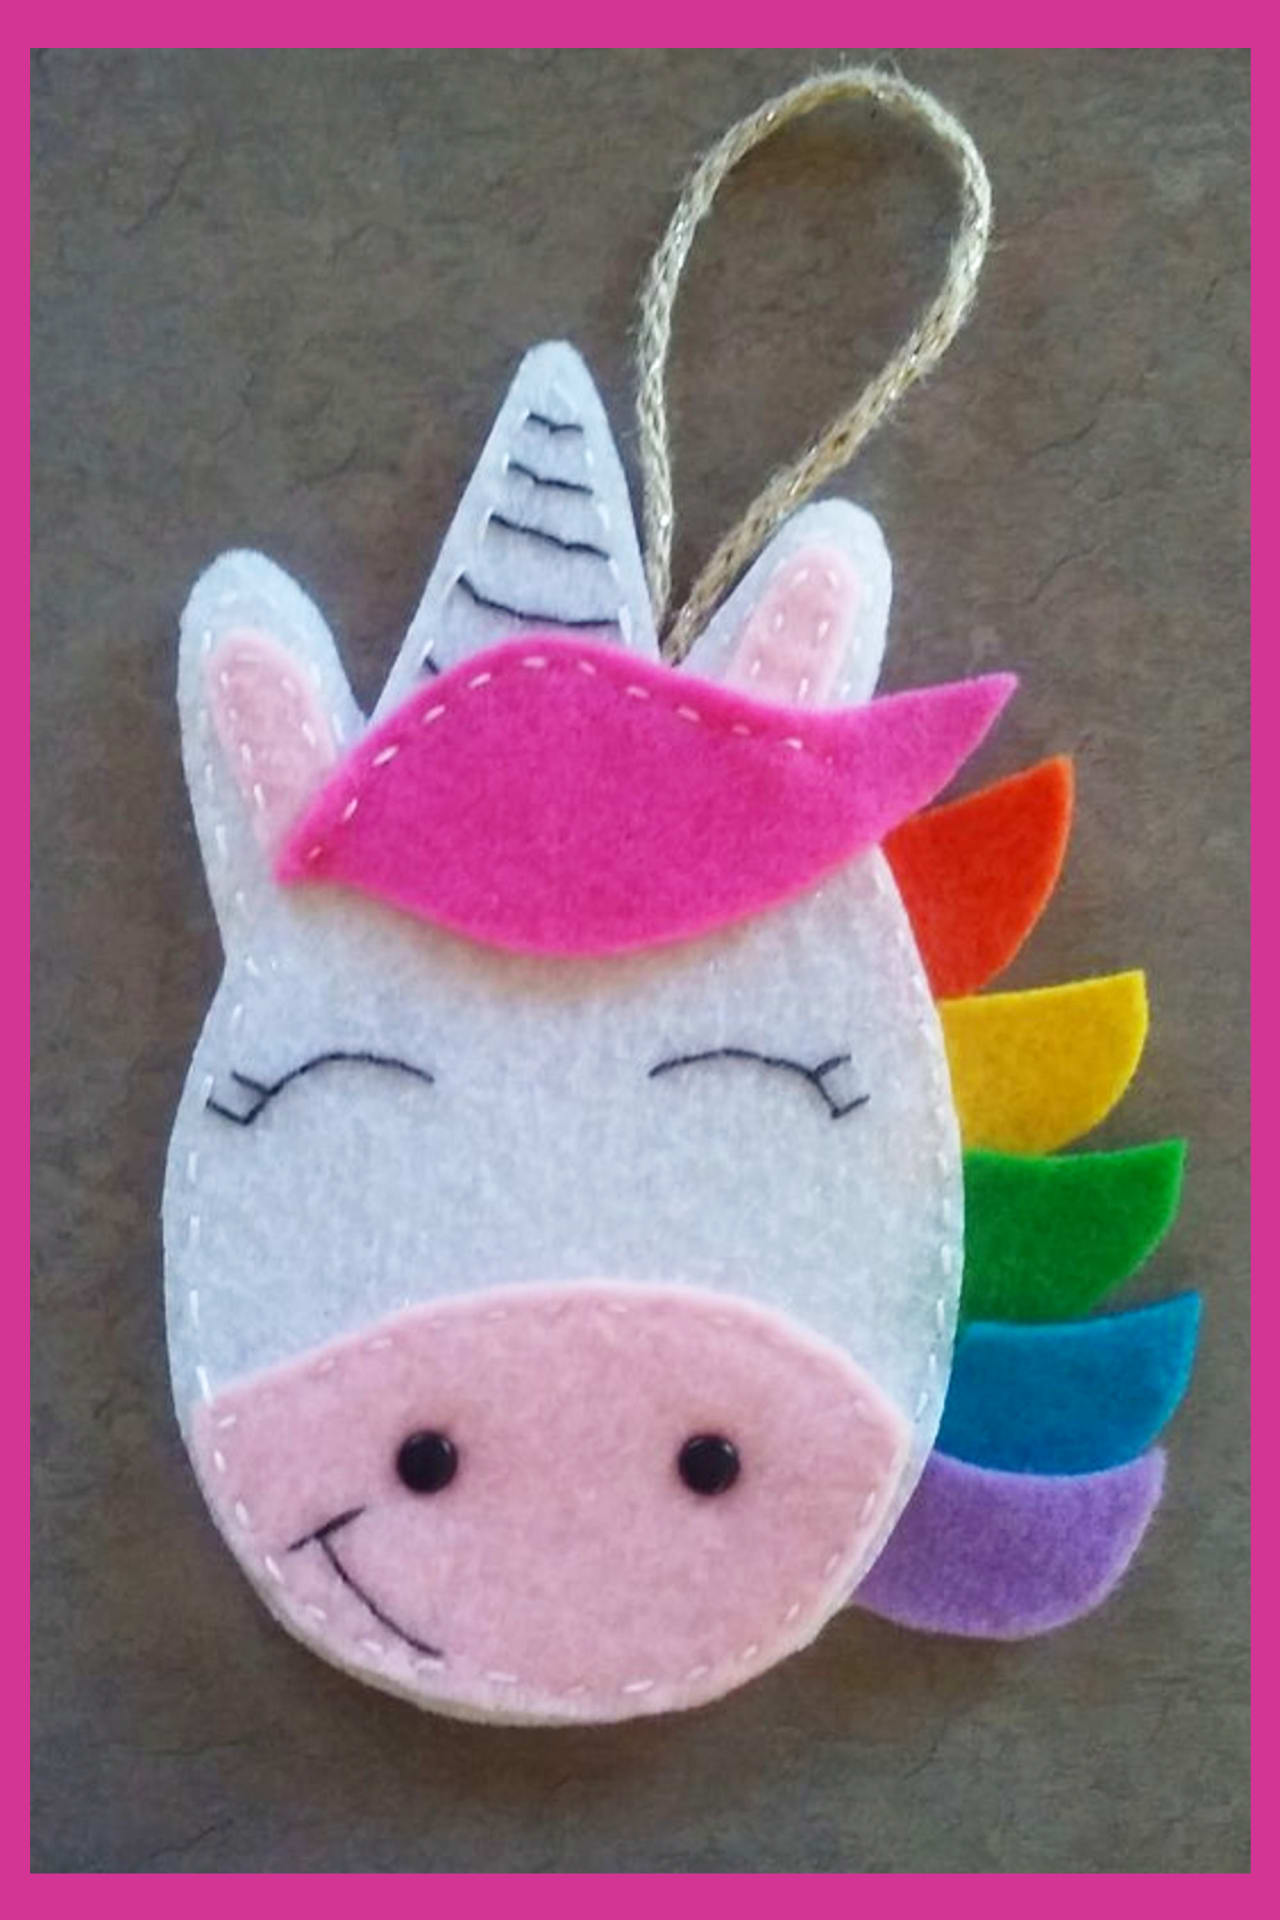 Unicorn crafts - fun and easy DIY unicorn craft projects for kids and for unicorn birthday parties - felt crafts for kids